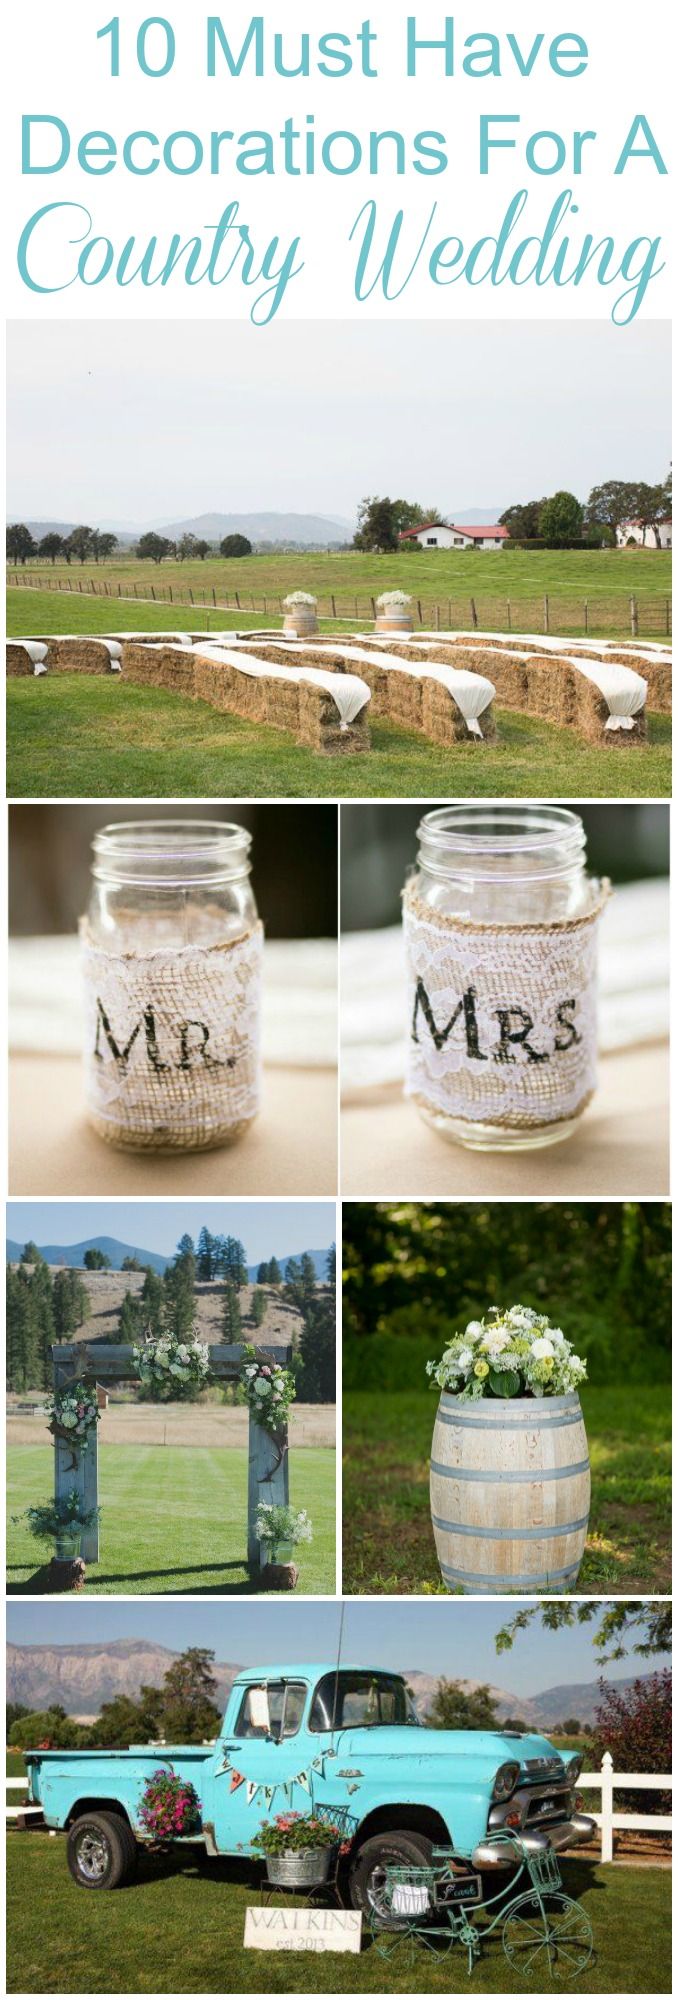 10 Decorations You Must Have For A Country Wedding ...